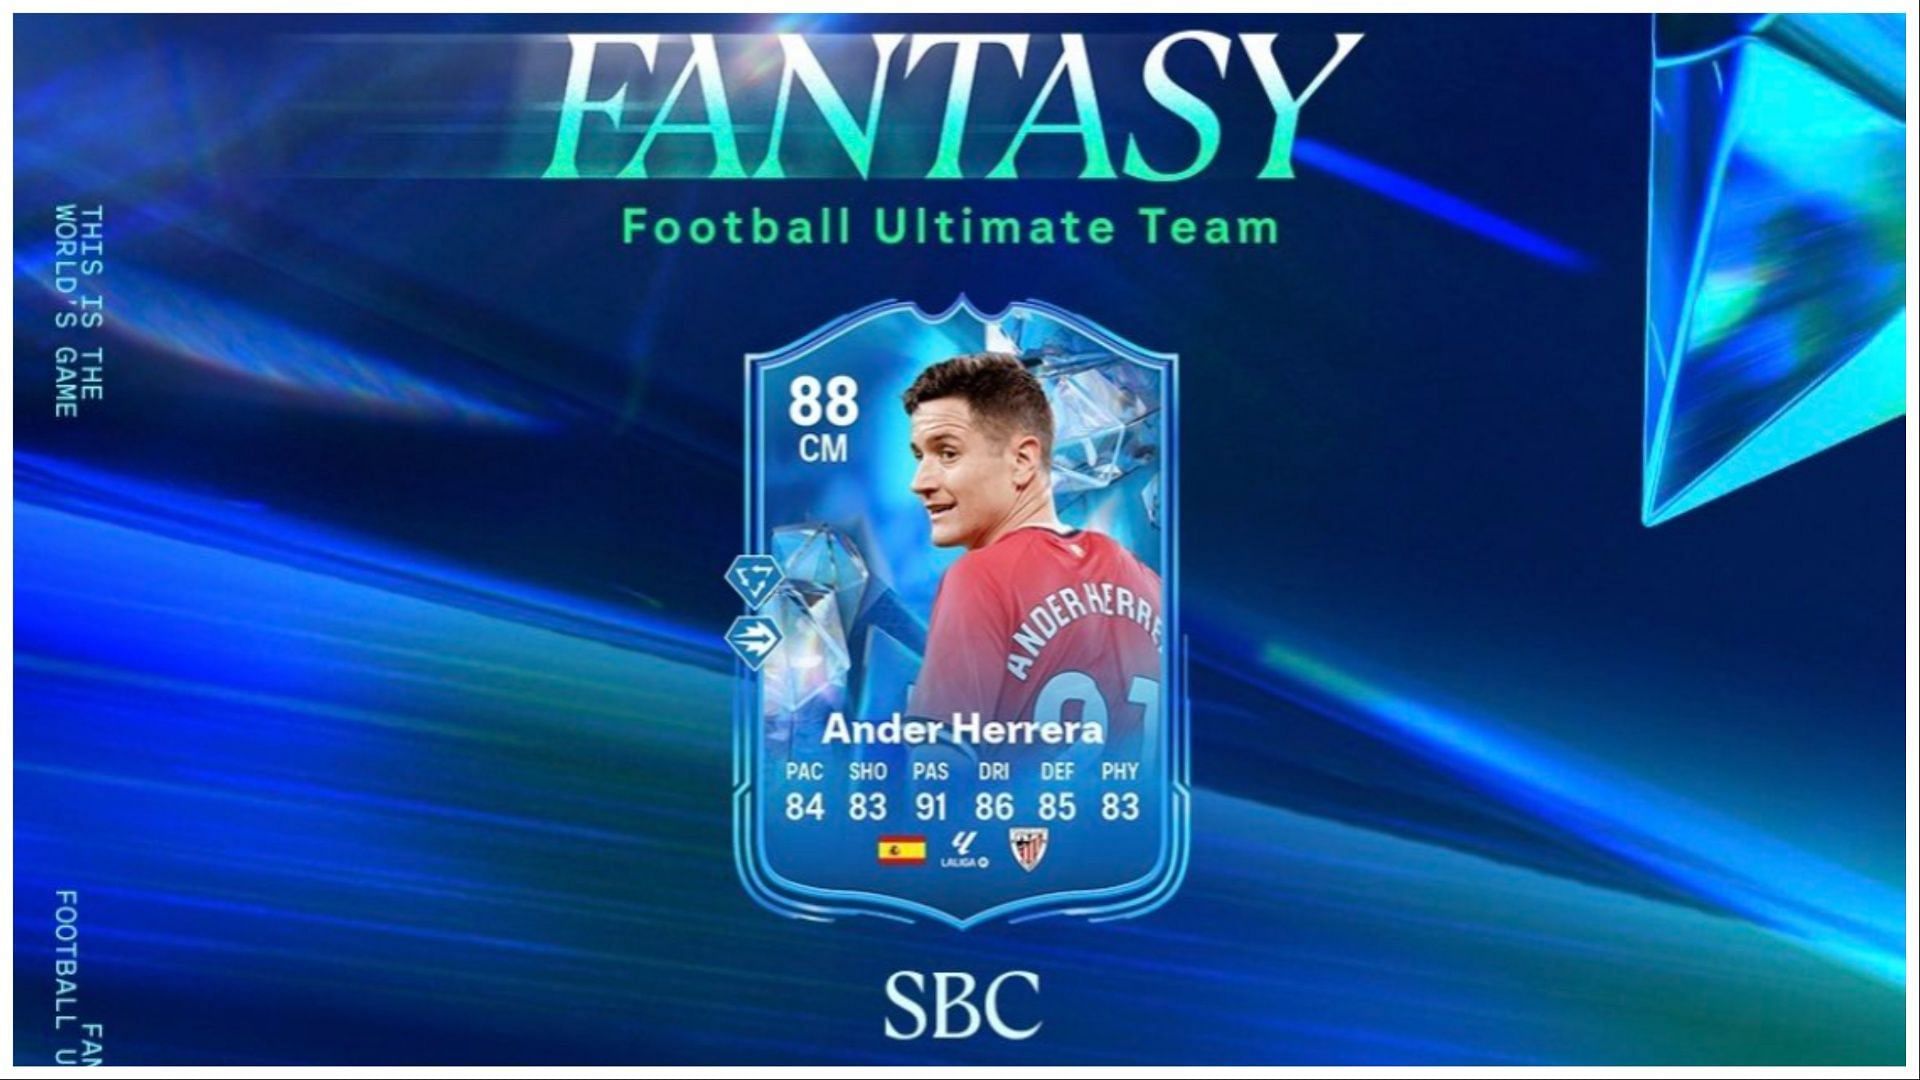 The EA FC 24 Ander Herrera FC Fantasy SBC is now available